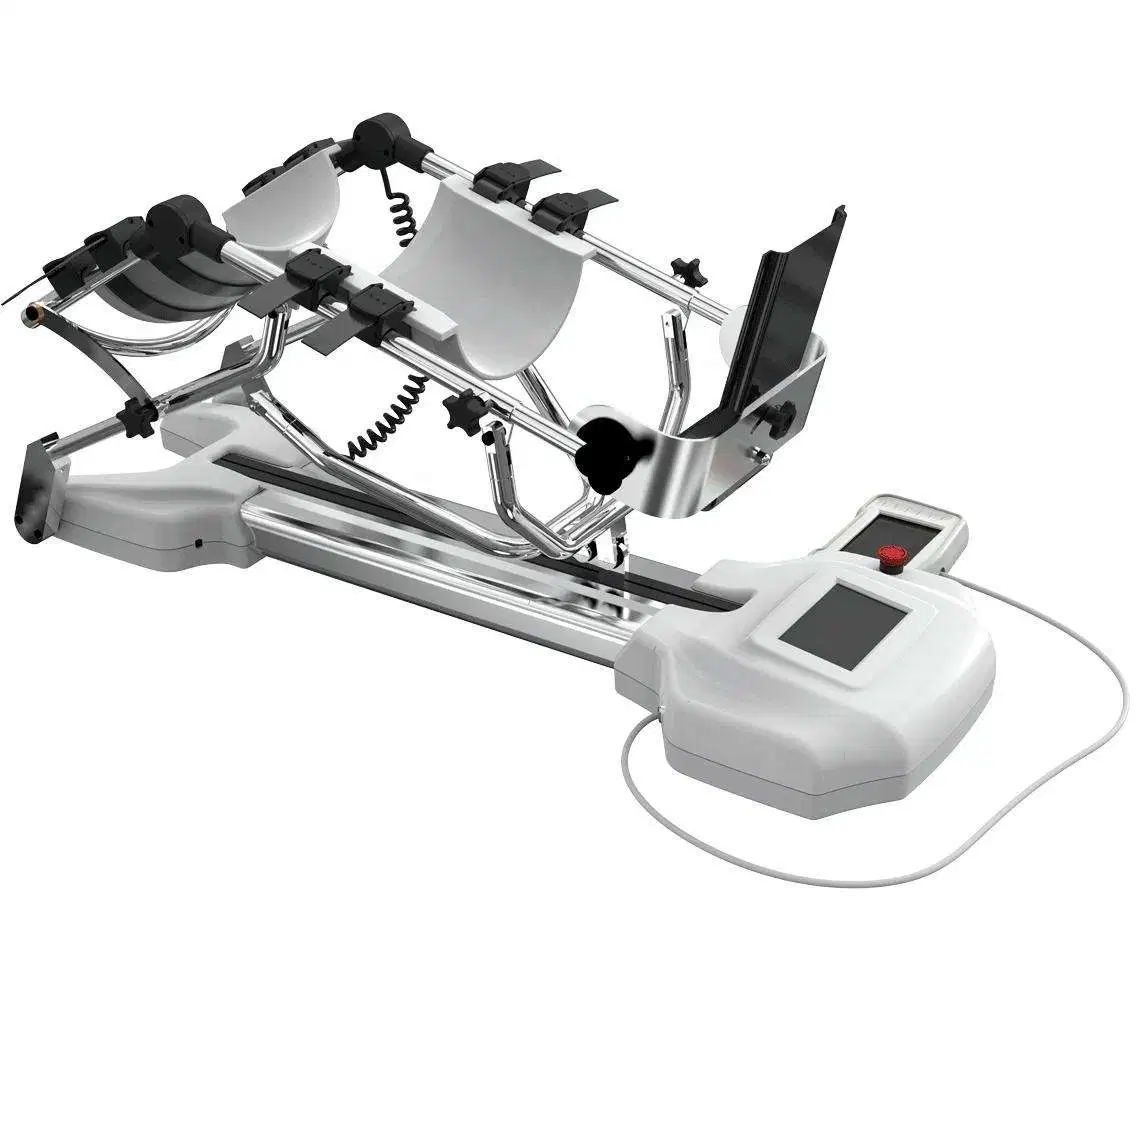 Medical High quality/High cost performance Physical Therapy Equipment Lower Limb Cpm Continuous Passive Motion